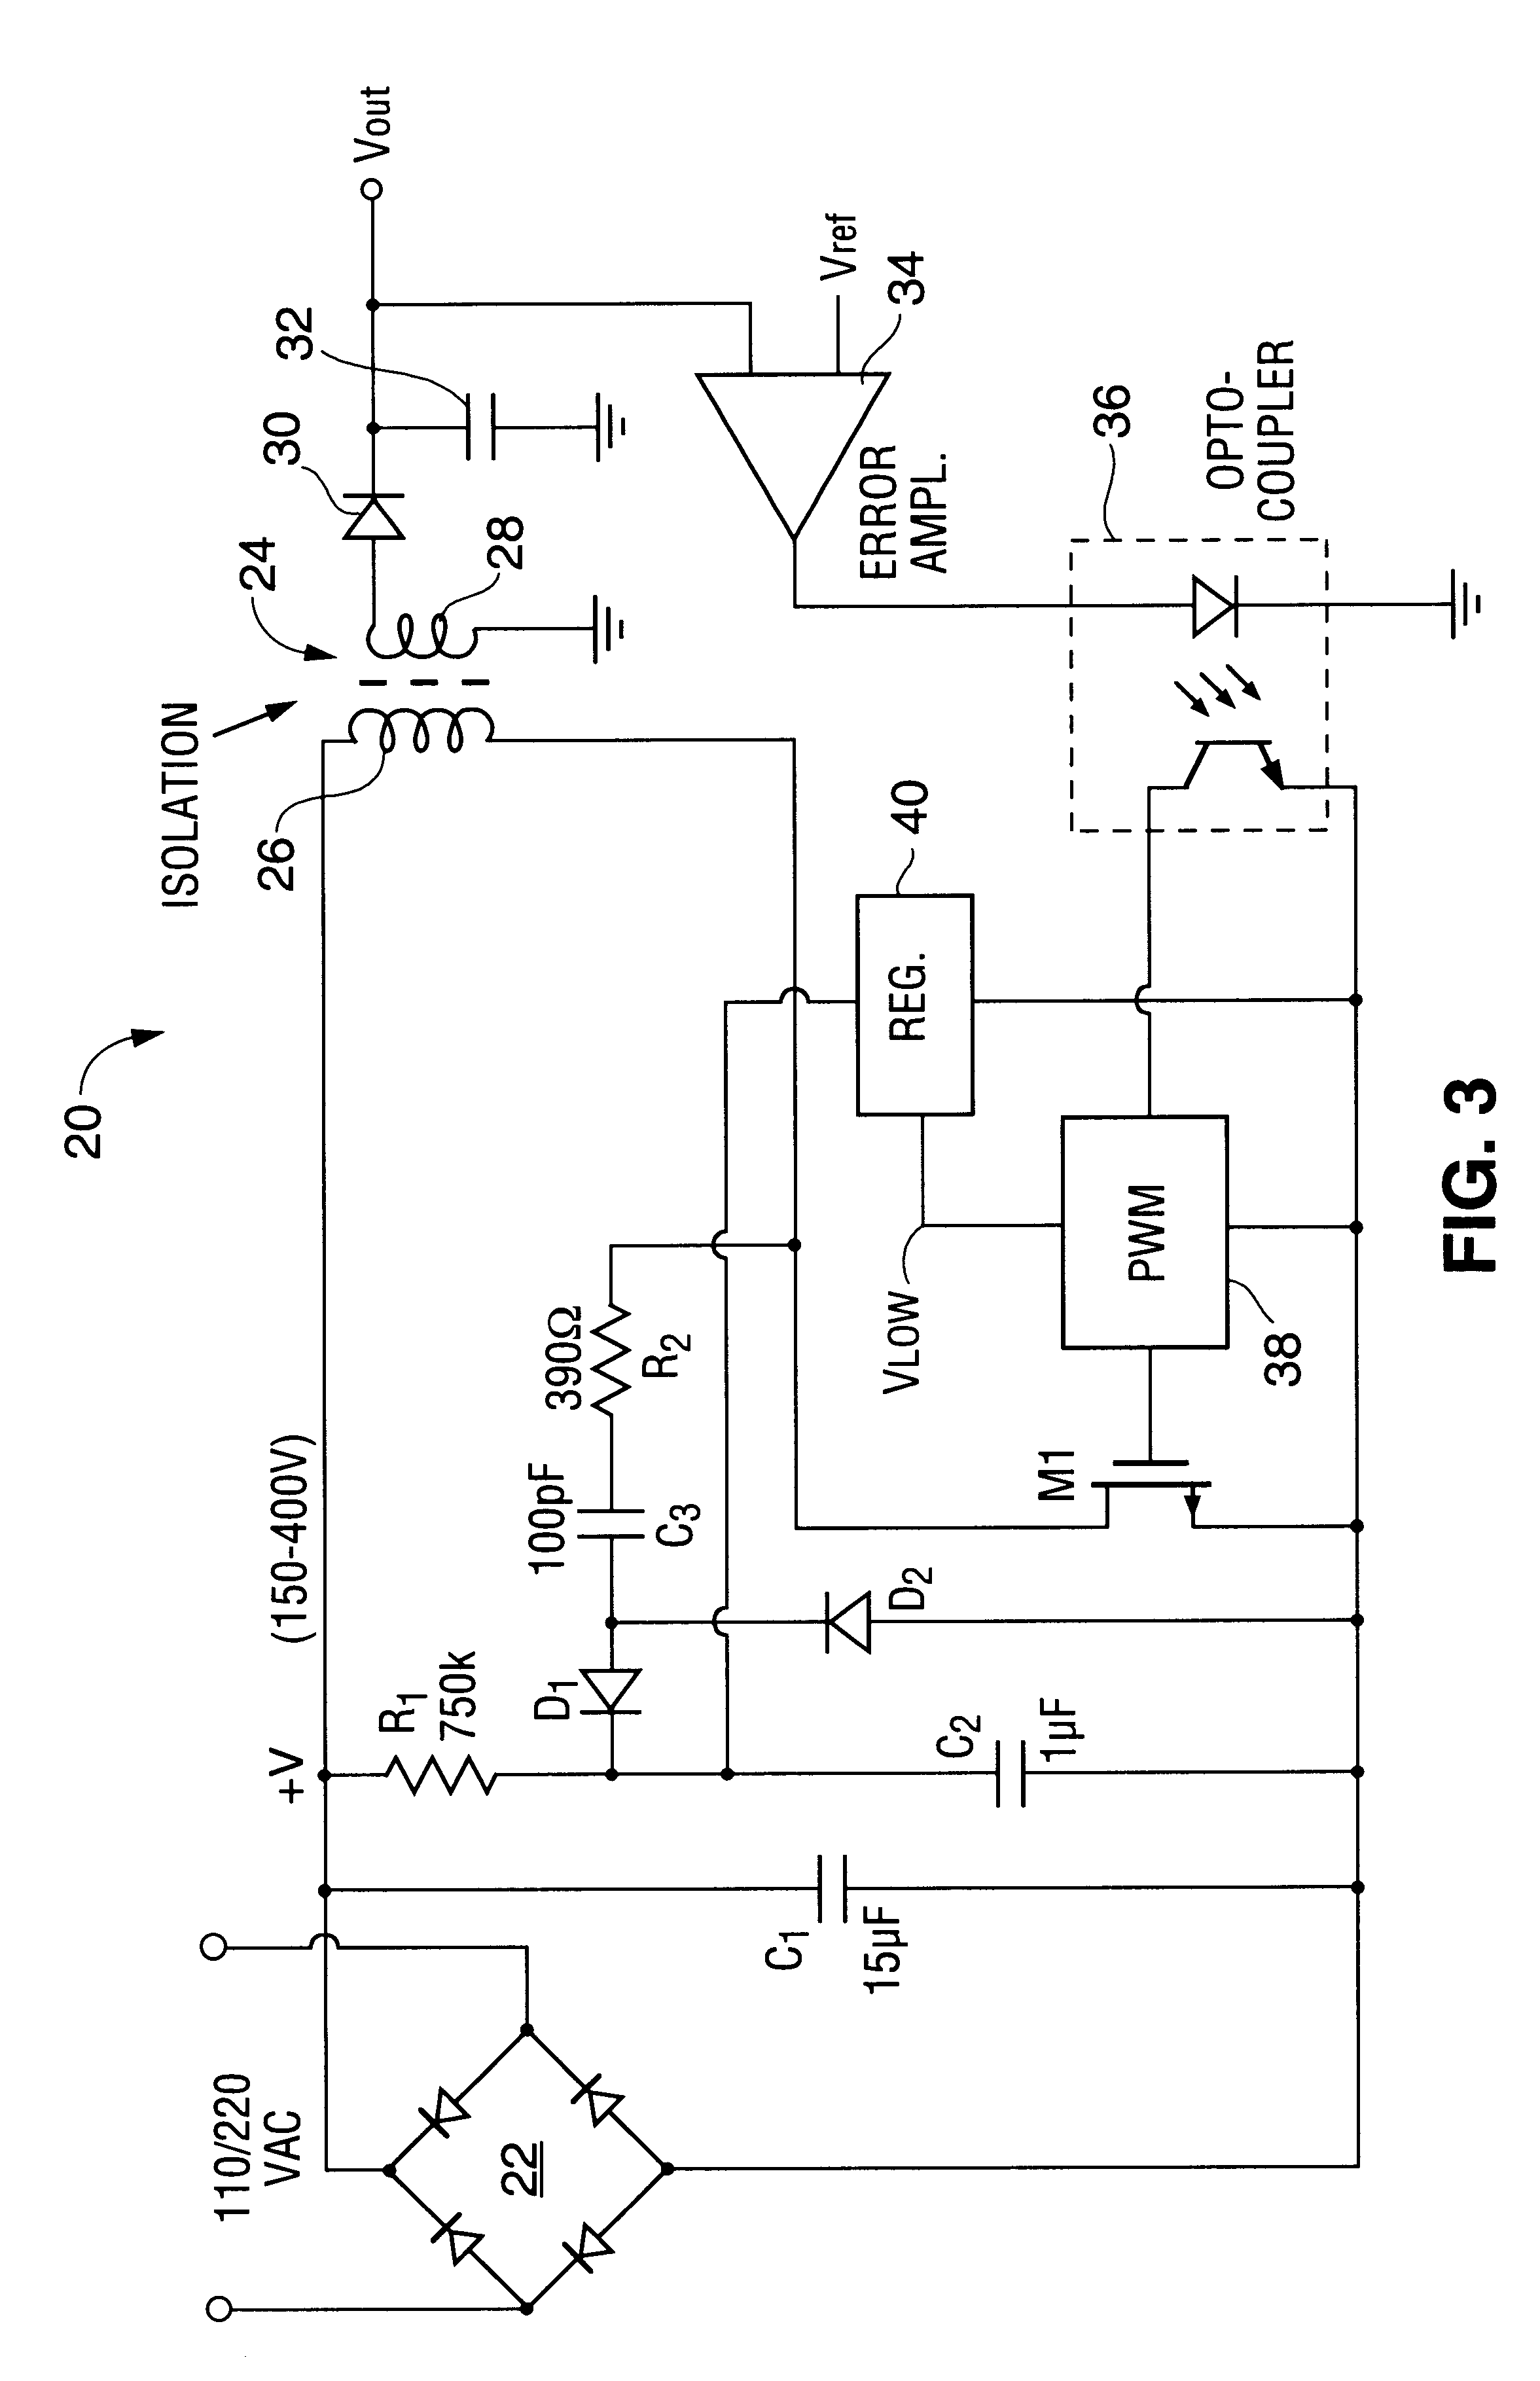 Power converter having a low voltage regulator powered from a high voltage source